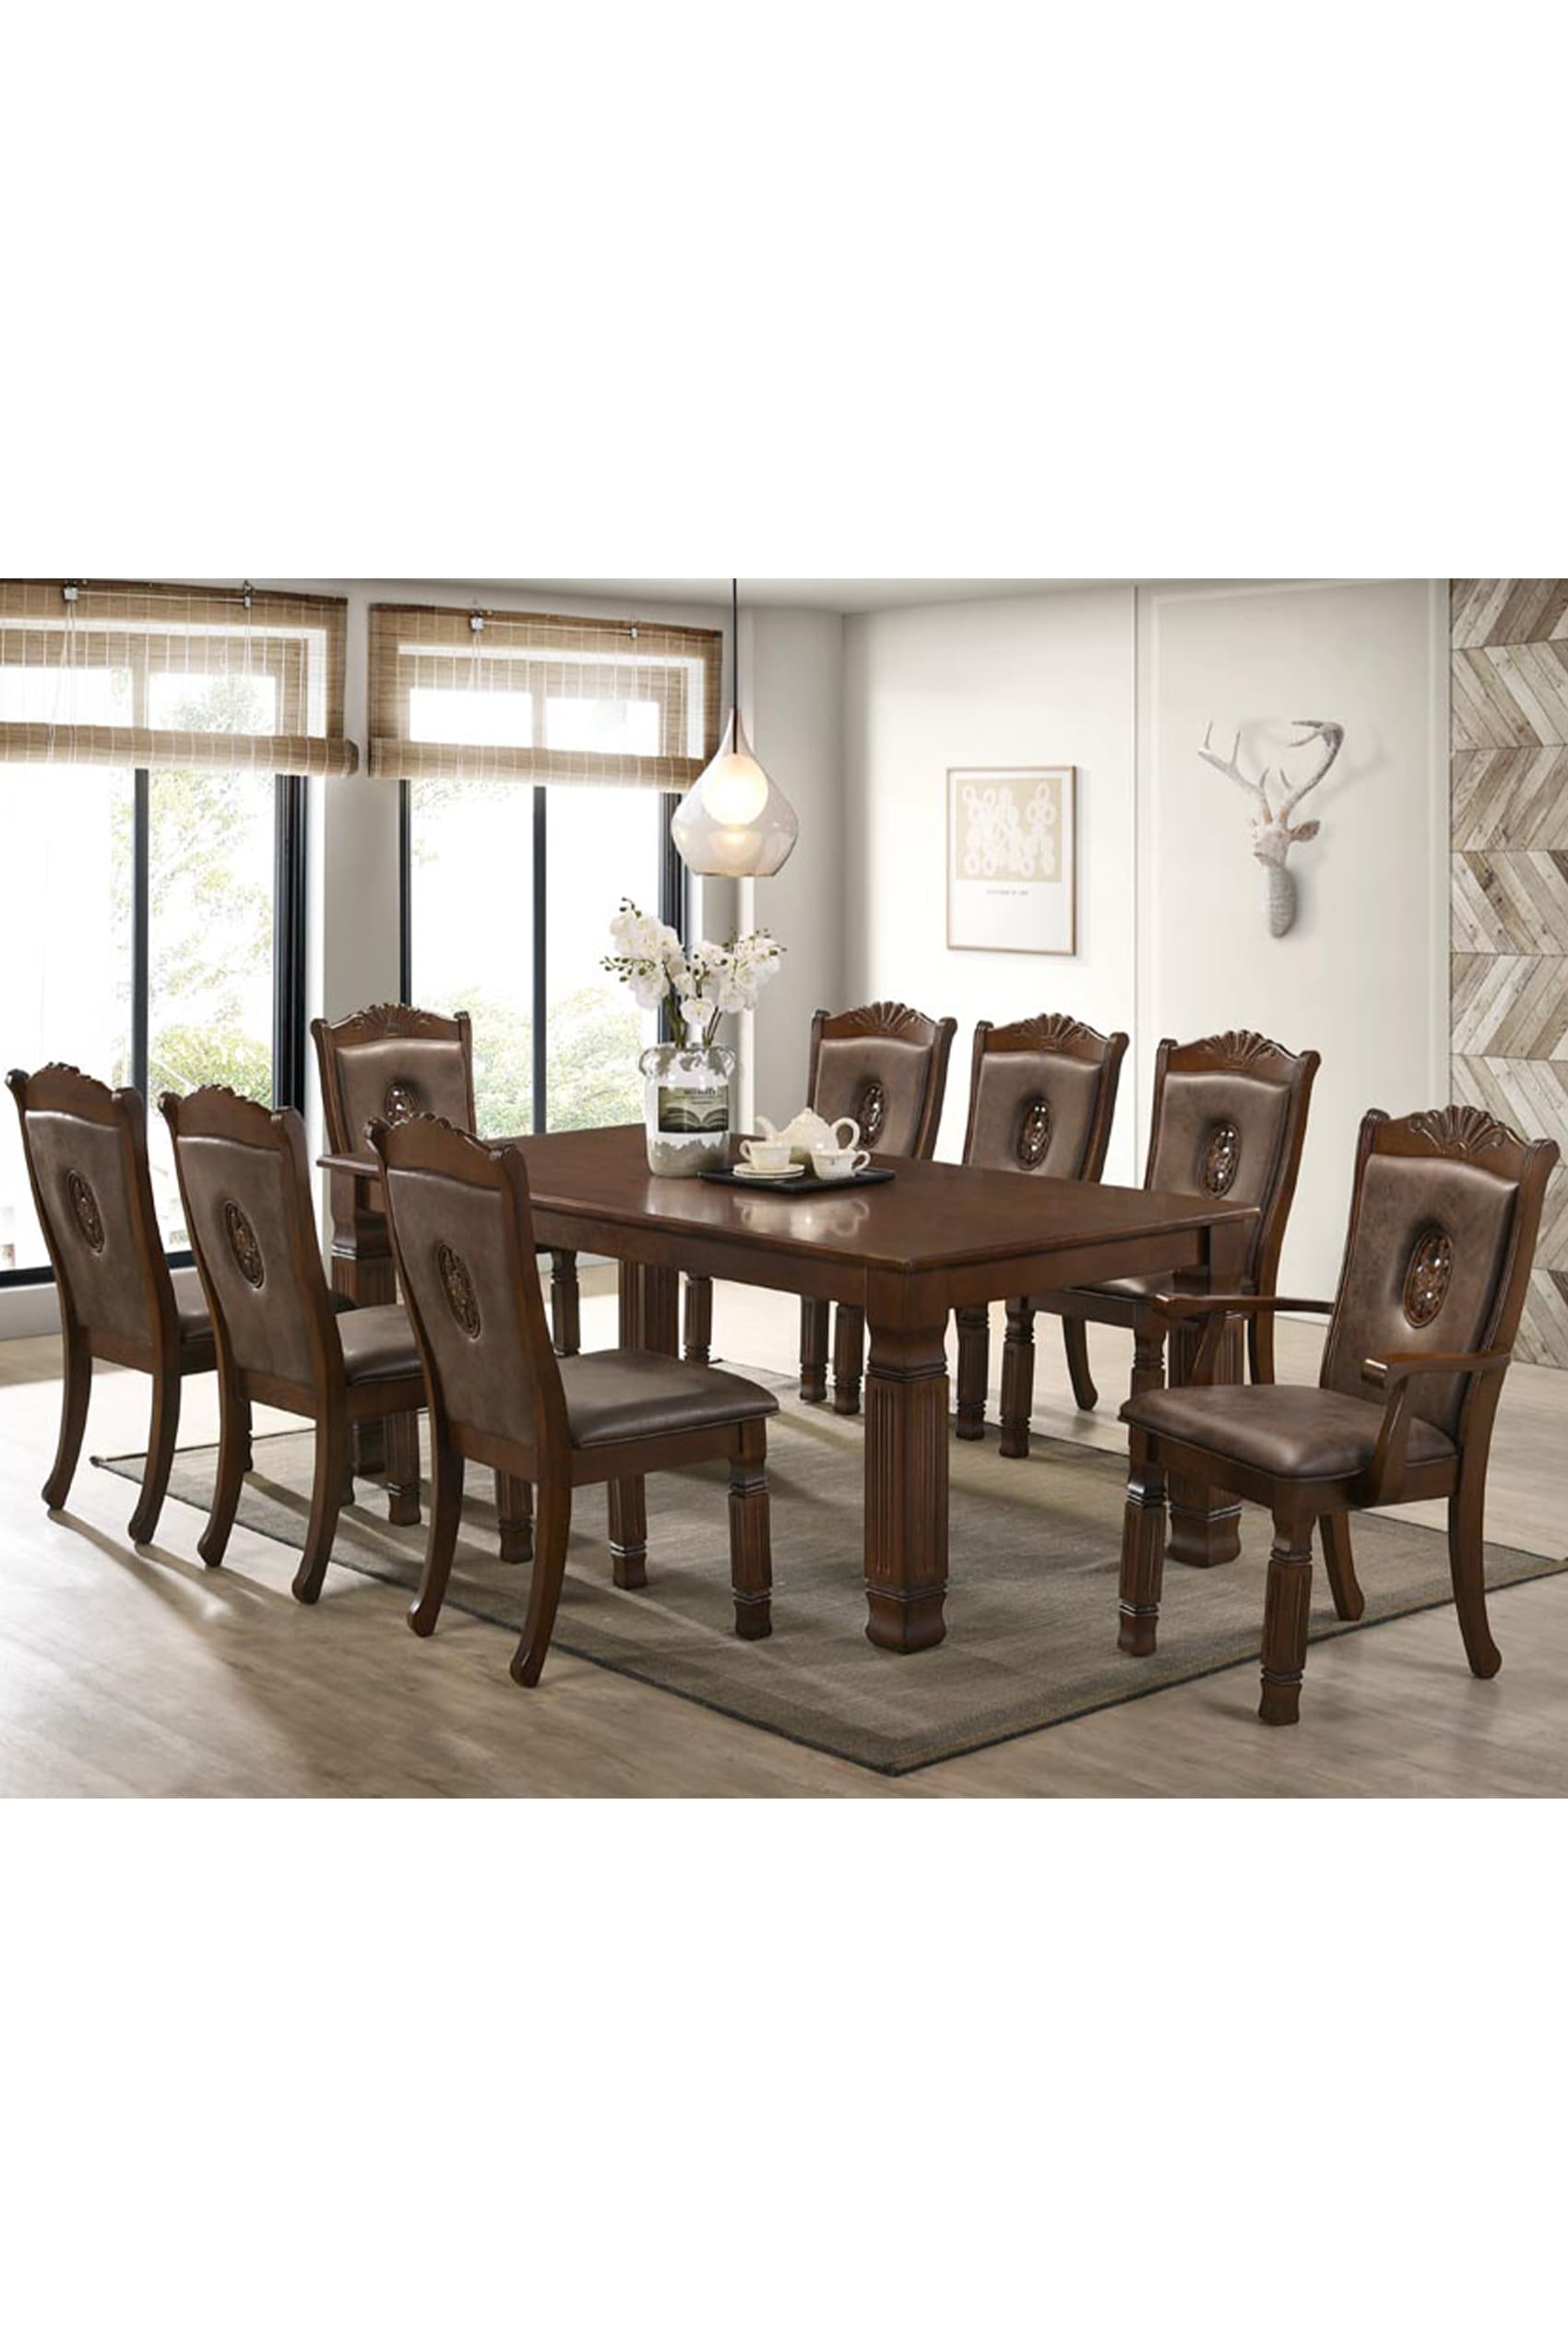 Fabrizia Dining Table + 6 Aisai Dining Arm Chairs